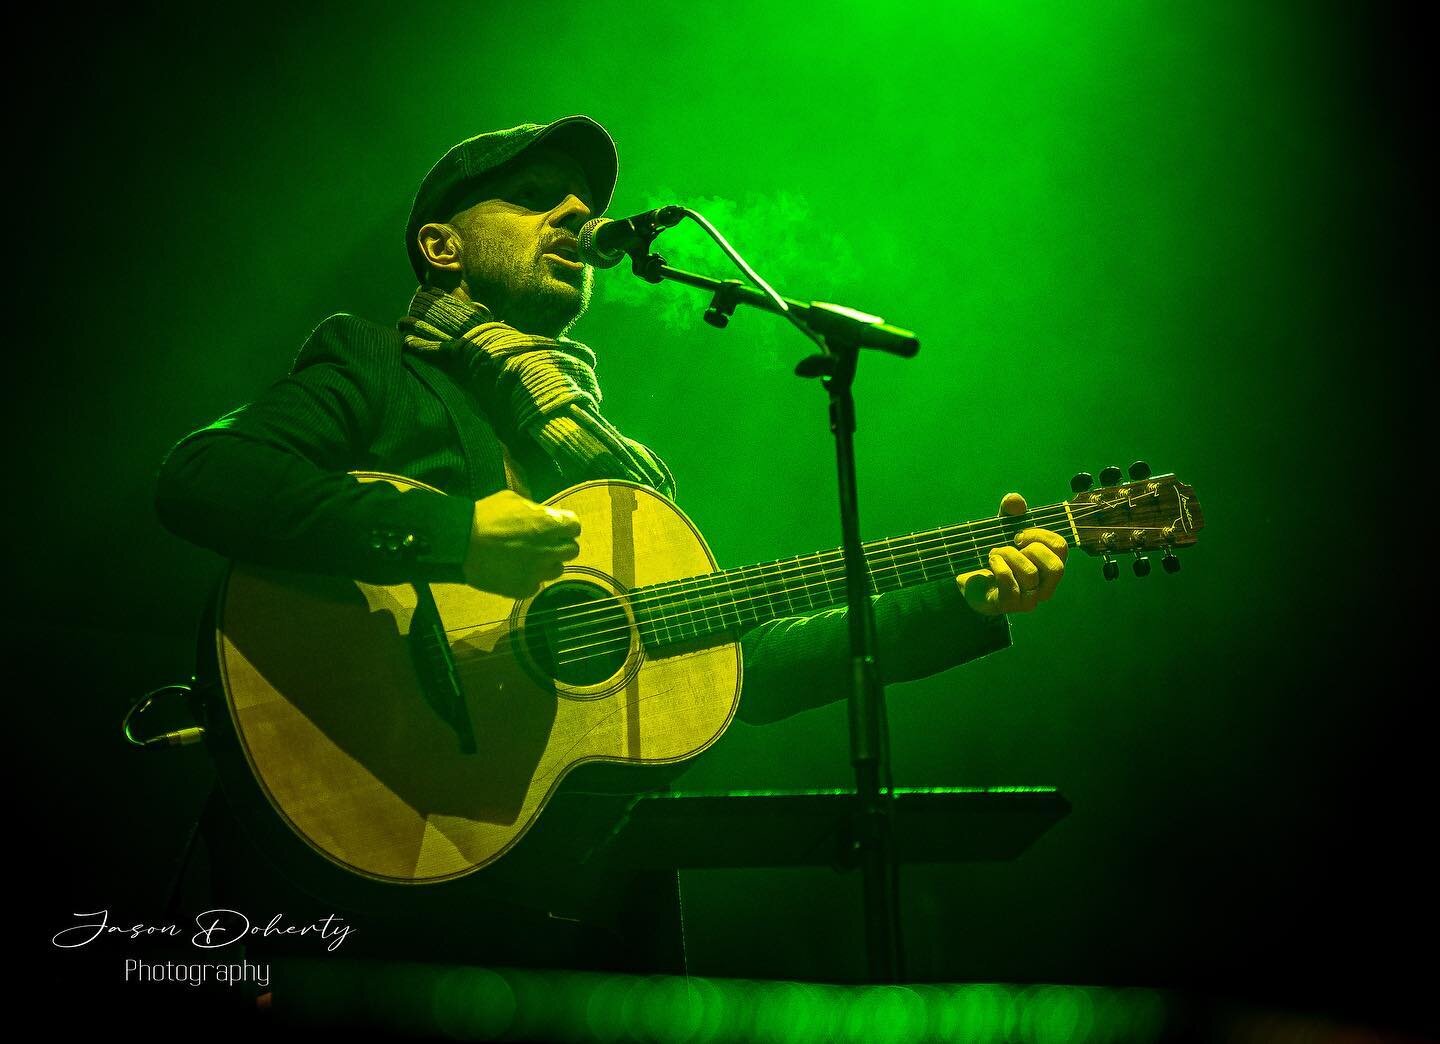 Received this from @jasondohertyphotography Thanks Jason!  Taken at @nyfdublin Collins Barracks the other night when I filled in for one of @thehighkingsofficial 
That D chord I&rsquo;m playing has never been so cold and frosty to play.  Such a fun g